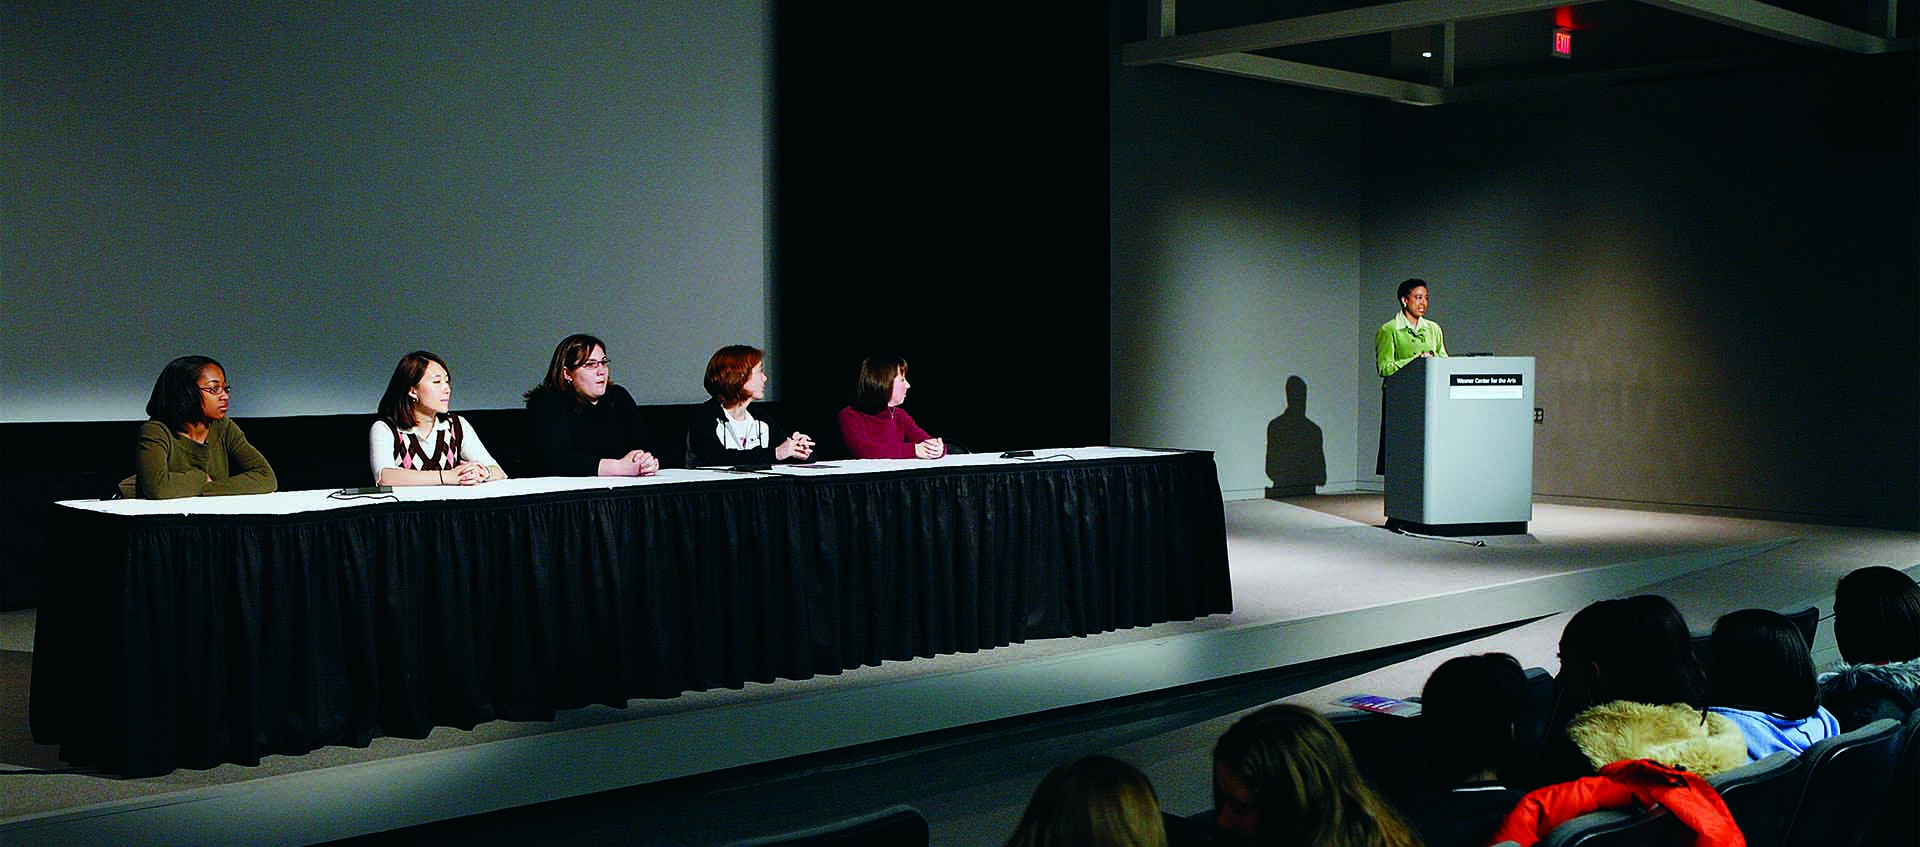 five panelists at long table on stage and one speaker at podium